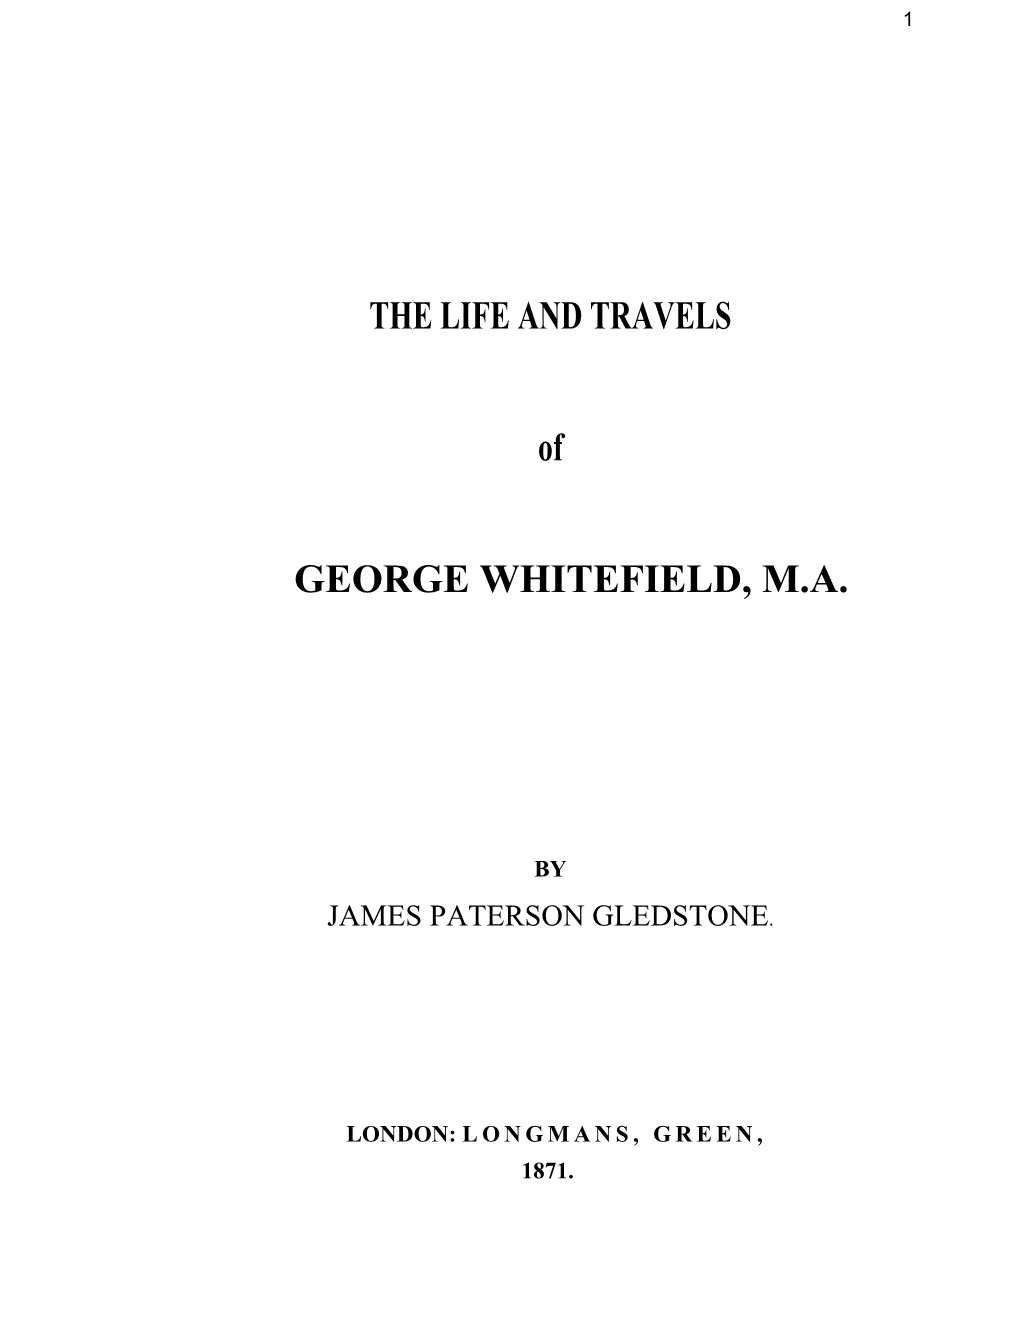 The Life and Travels of George Whitefield, by James P. Gledstone